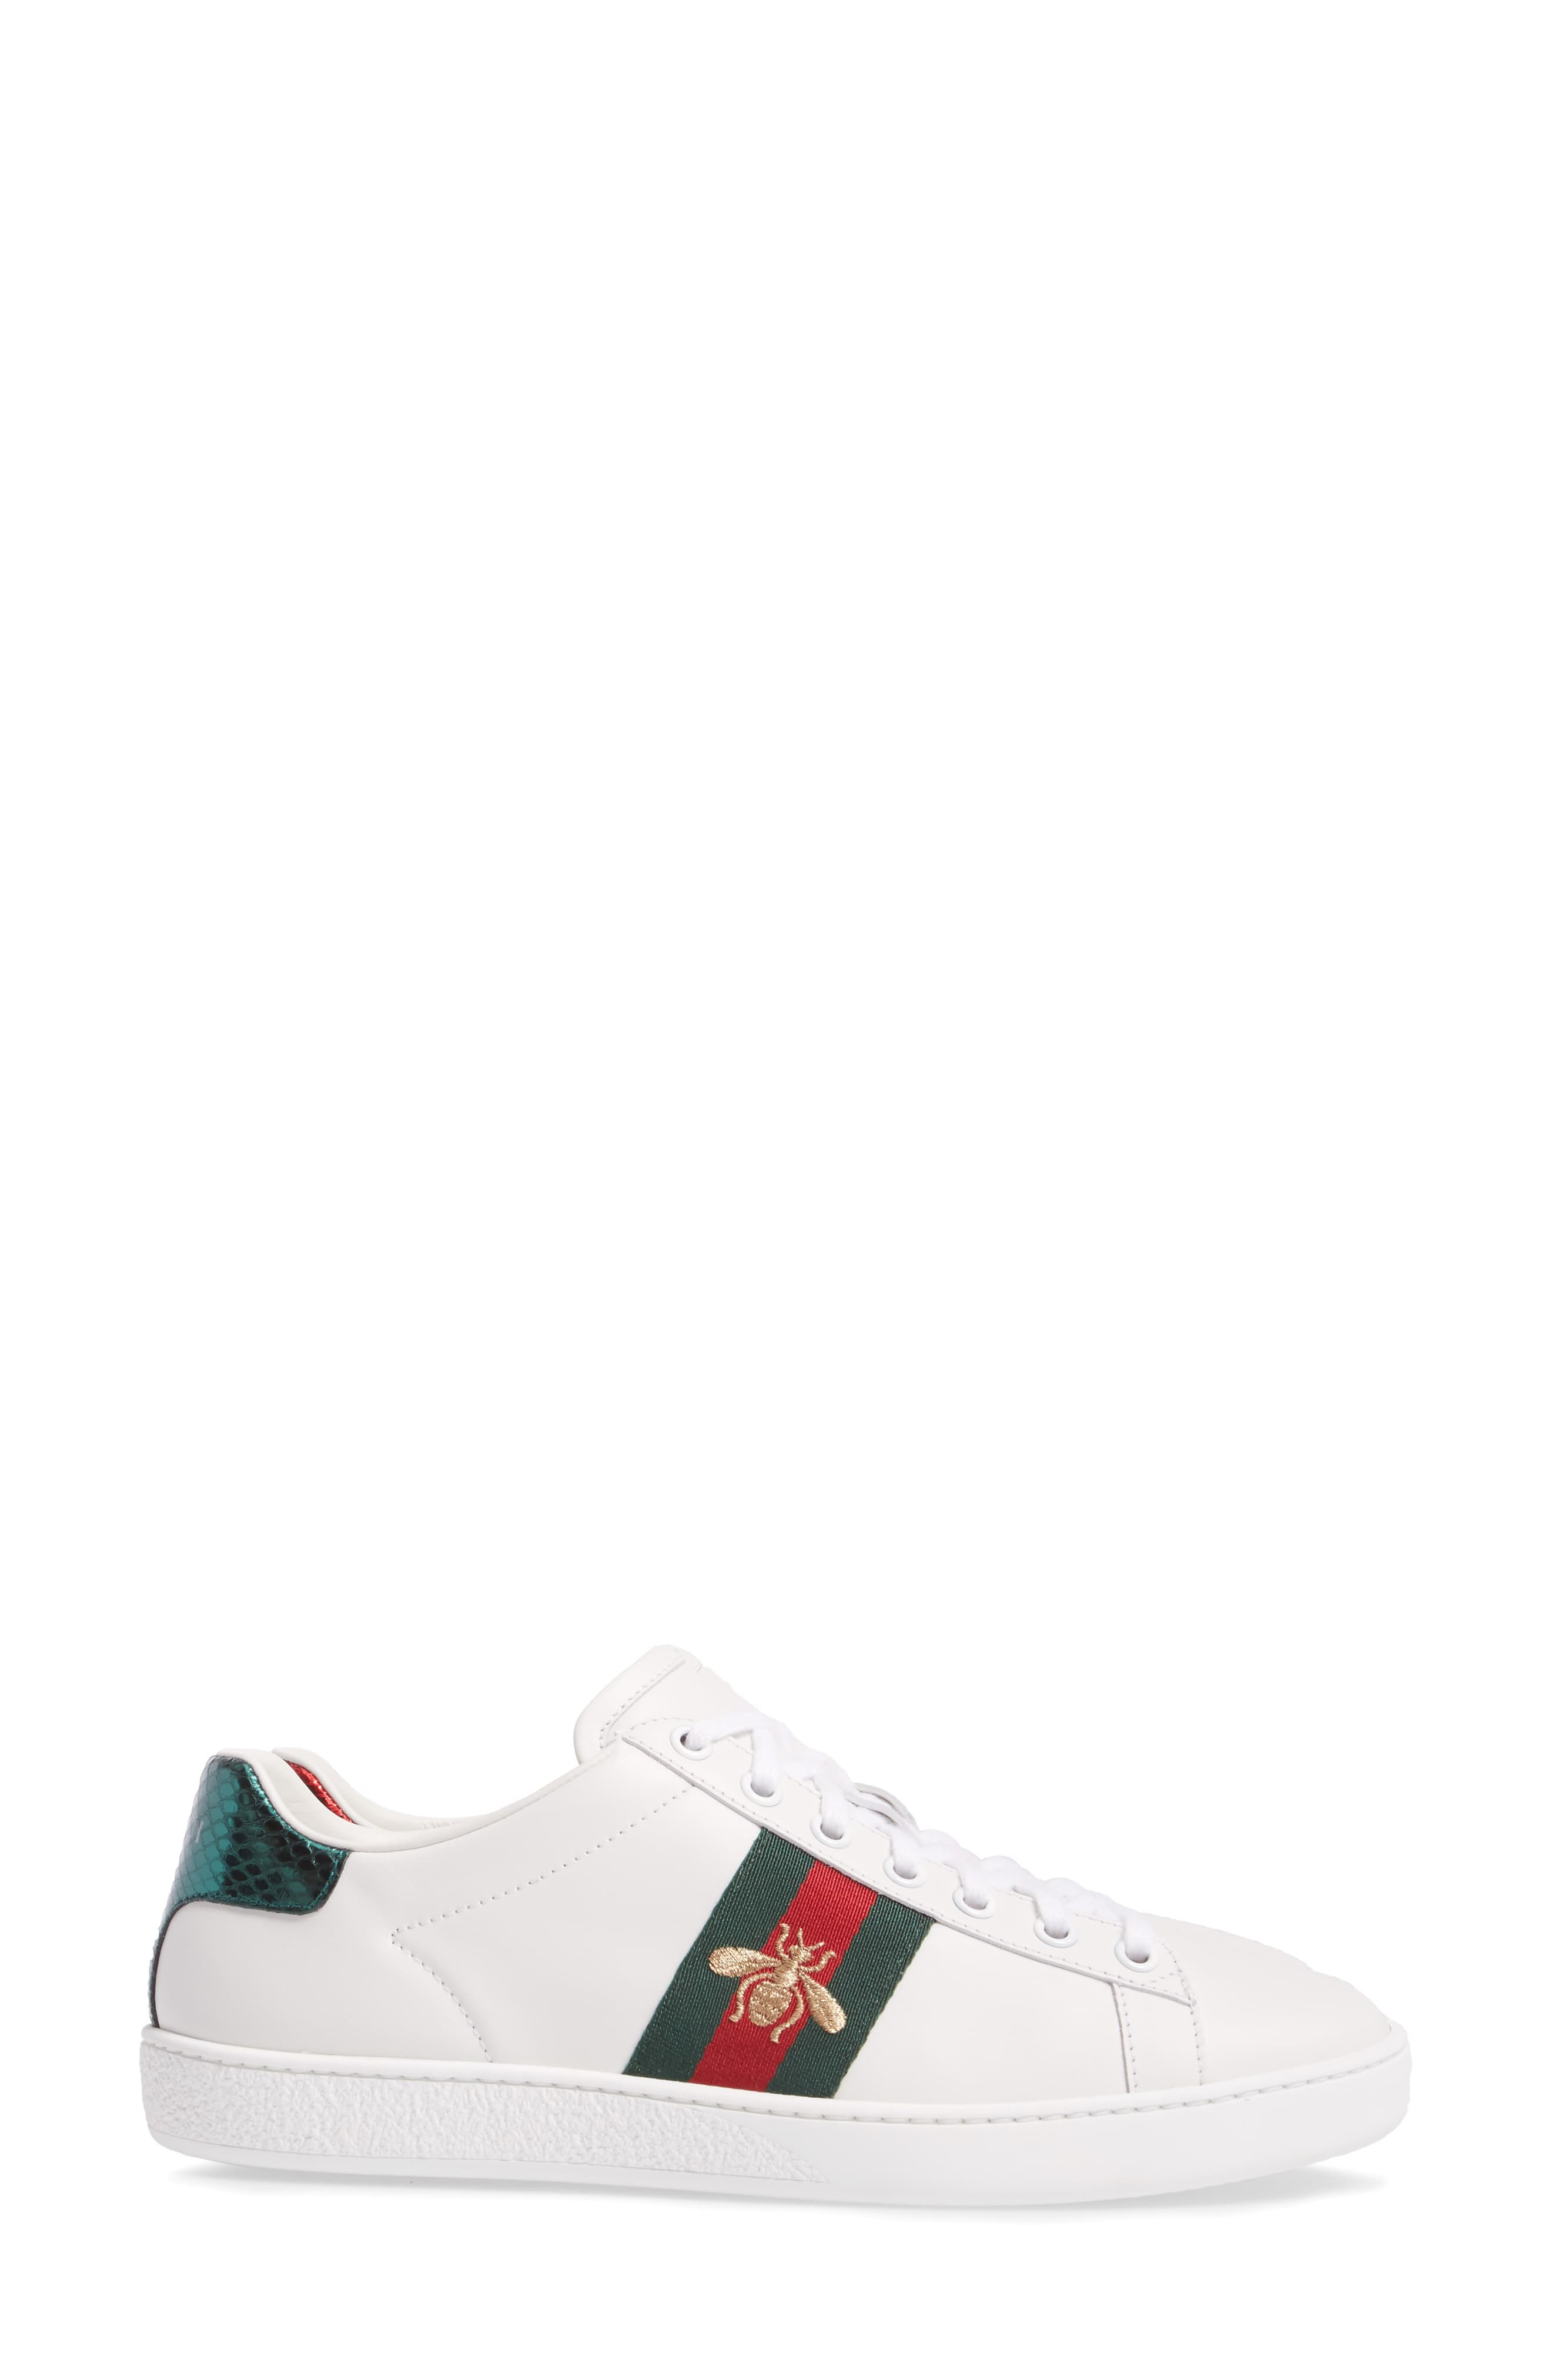 Gucci Women's Ace Embroidered Sneakers